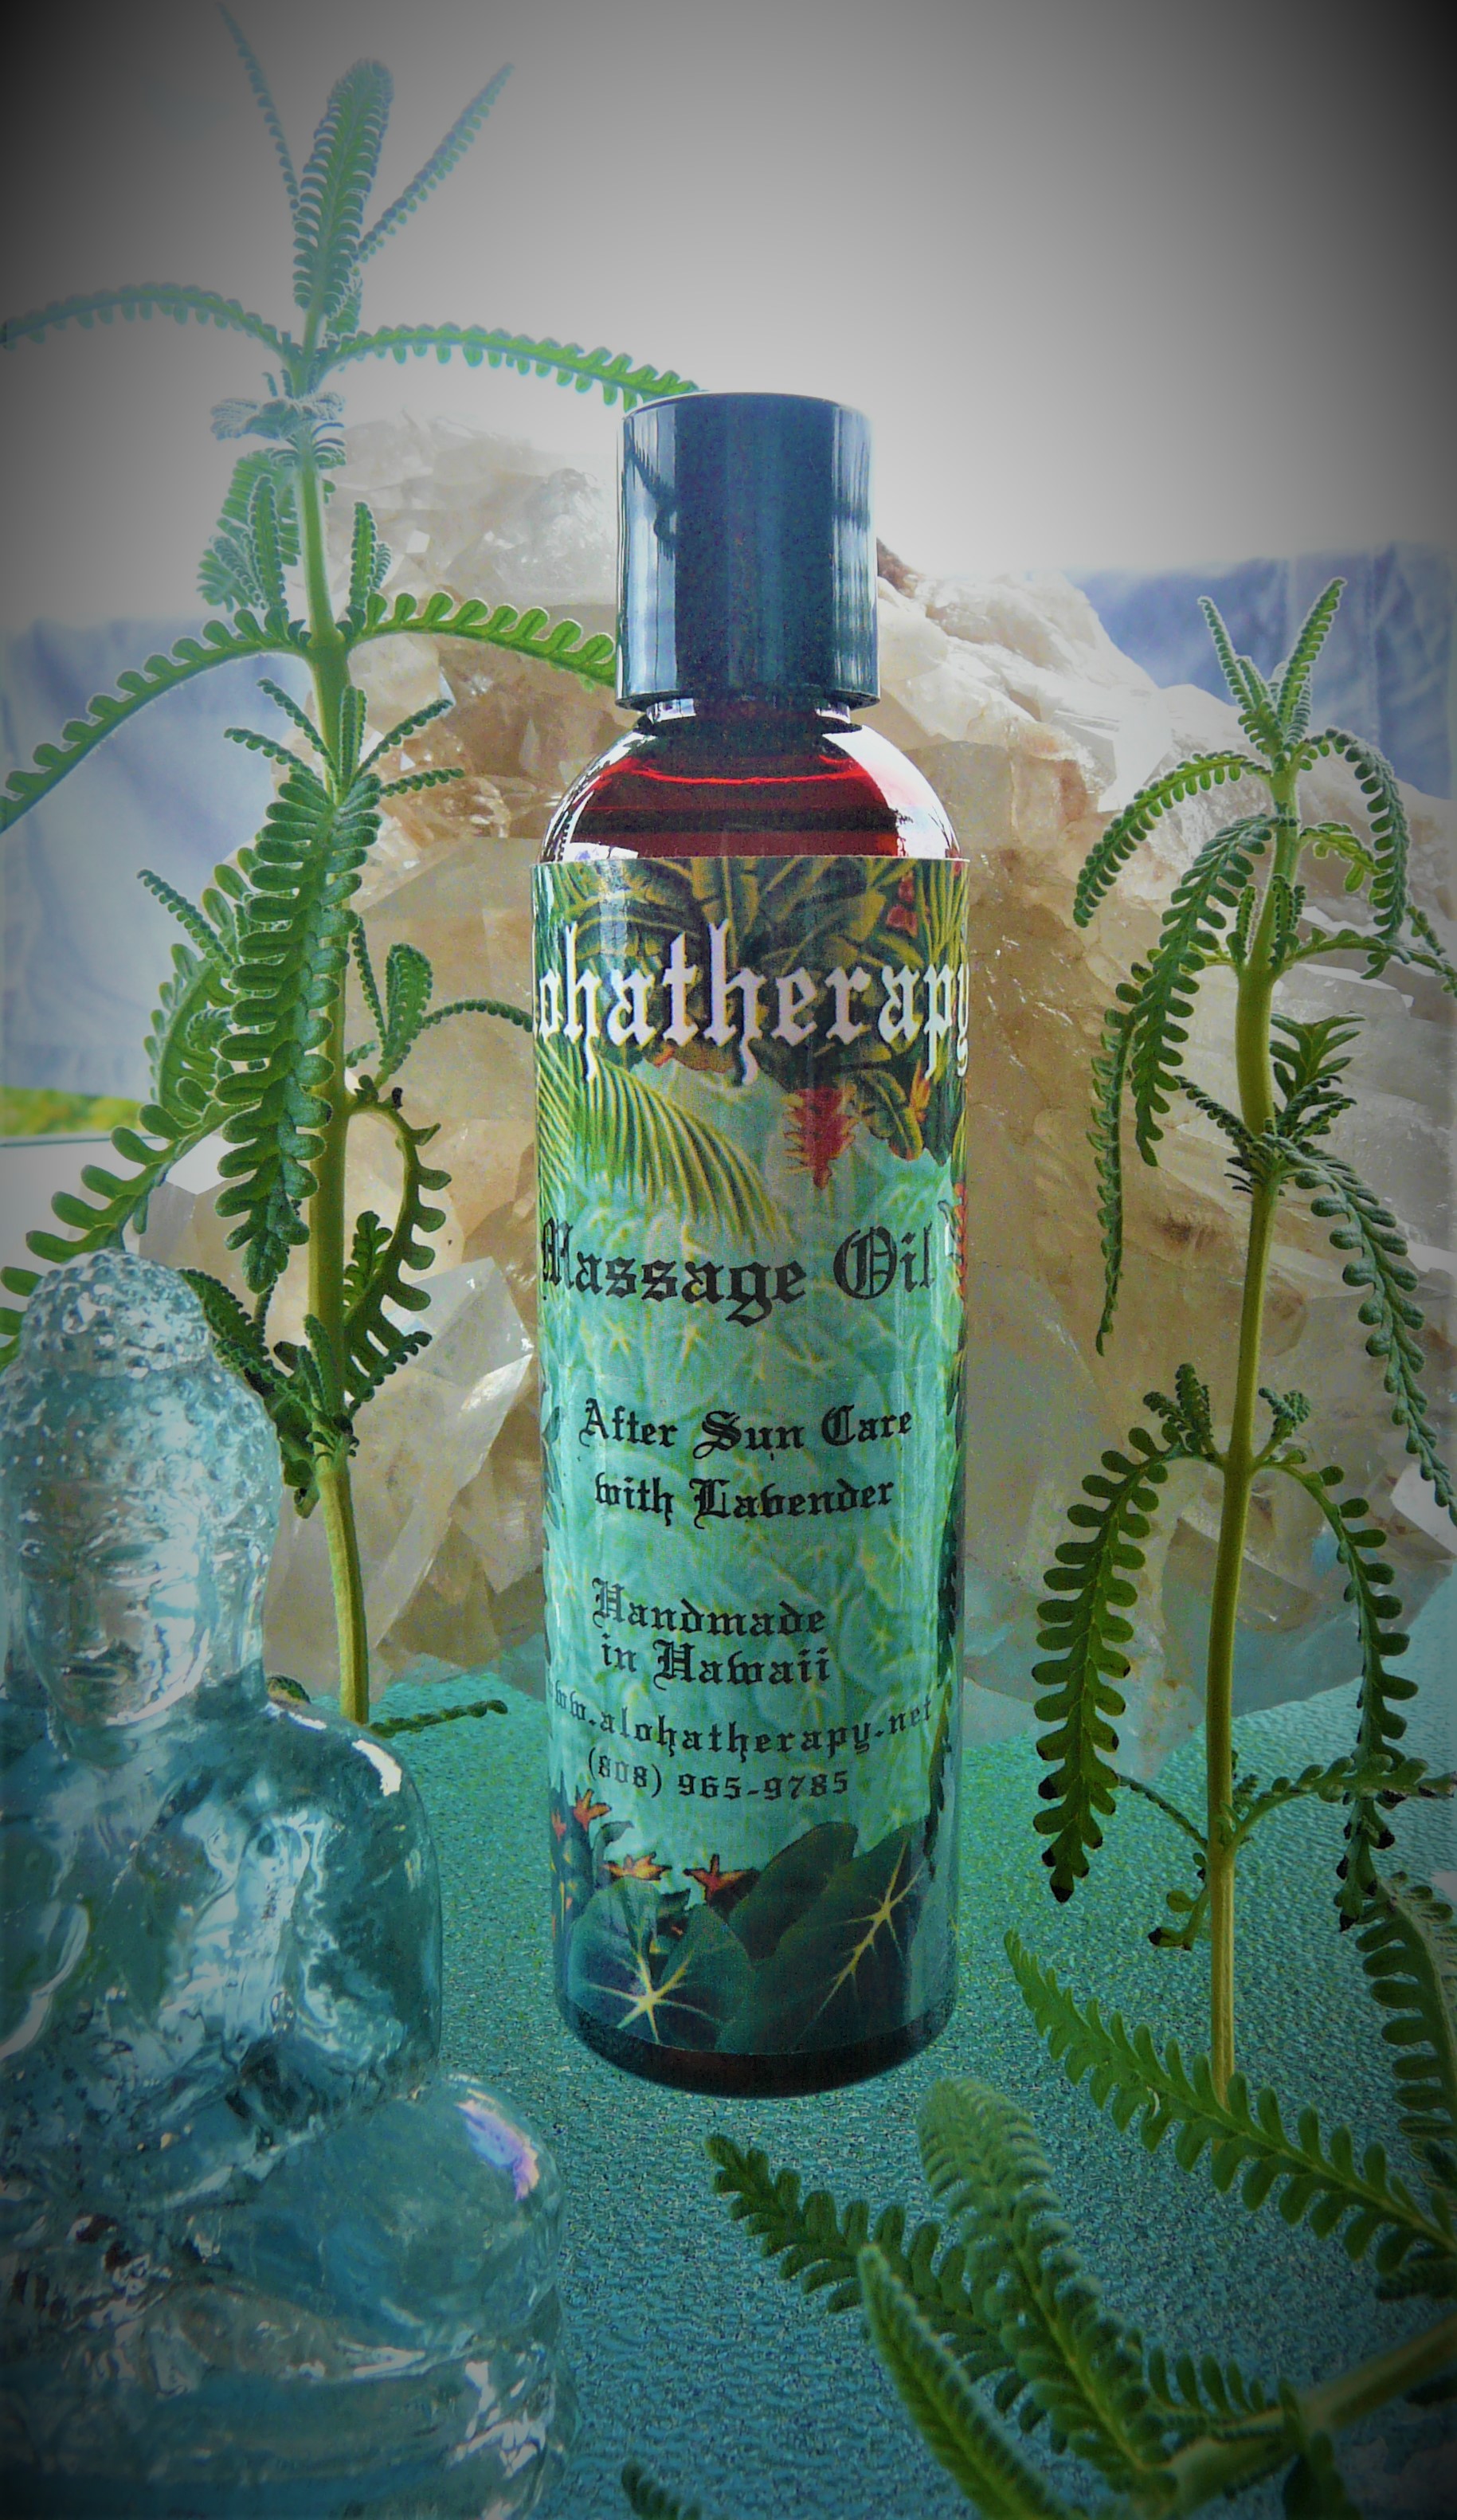 “after Sun Care With Lavender” Massage Oil Bath And Body Oil Alohatherapy 